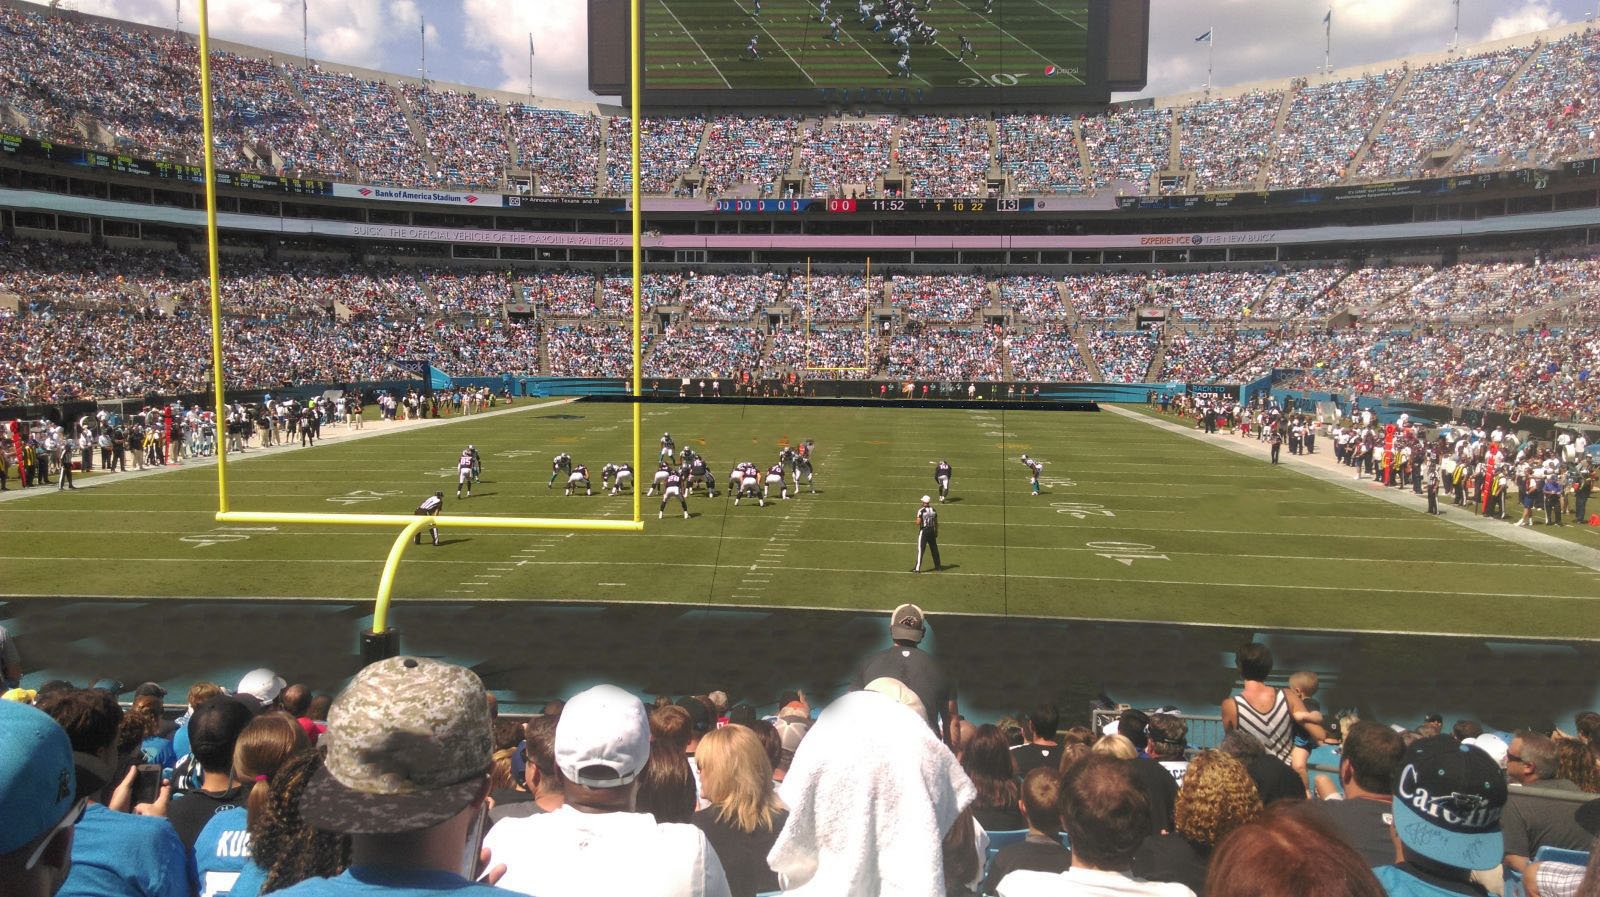 section 121, row 14 seat view  for football - bank of america stadium